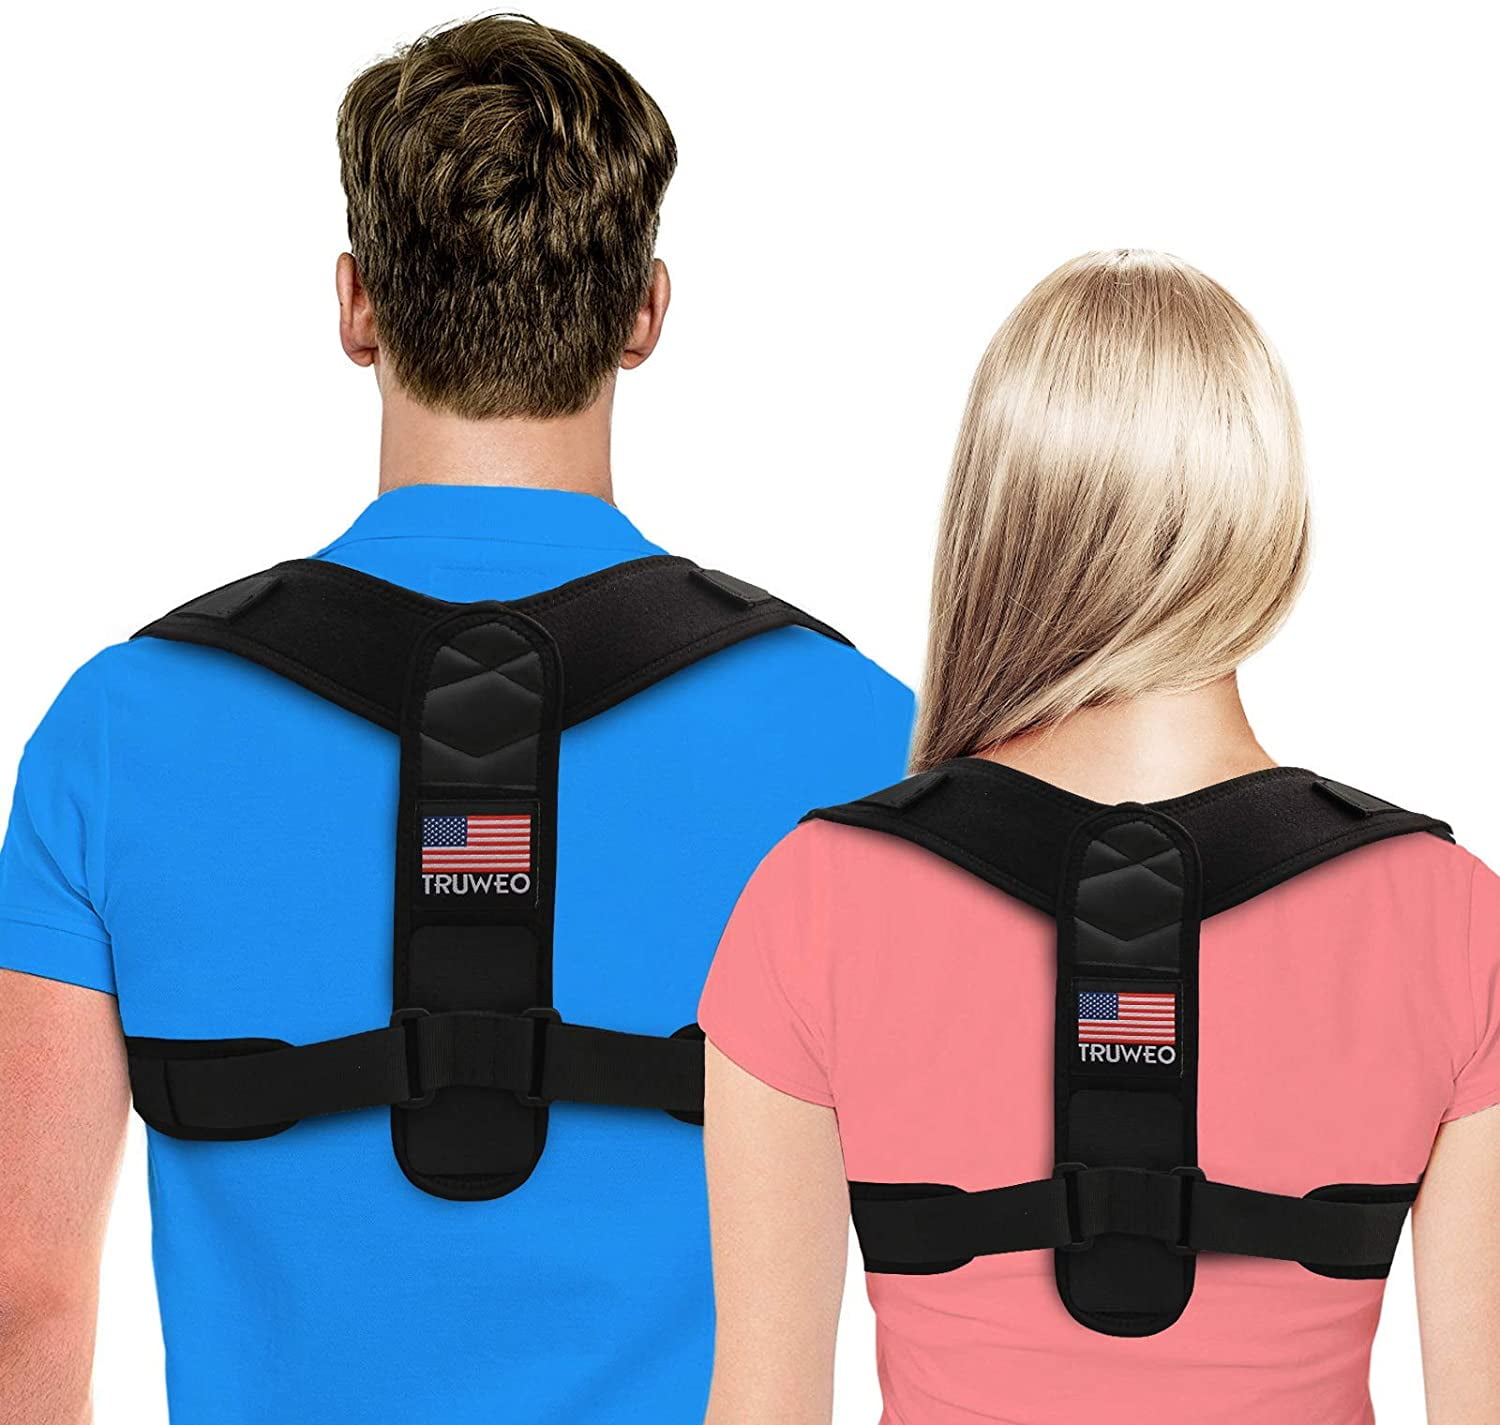 JimBest1880 Fashionable Posture Corrector for Men and Women Comfortable Upper Back Brace Clavicle Support Device BK76 